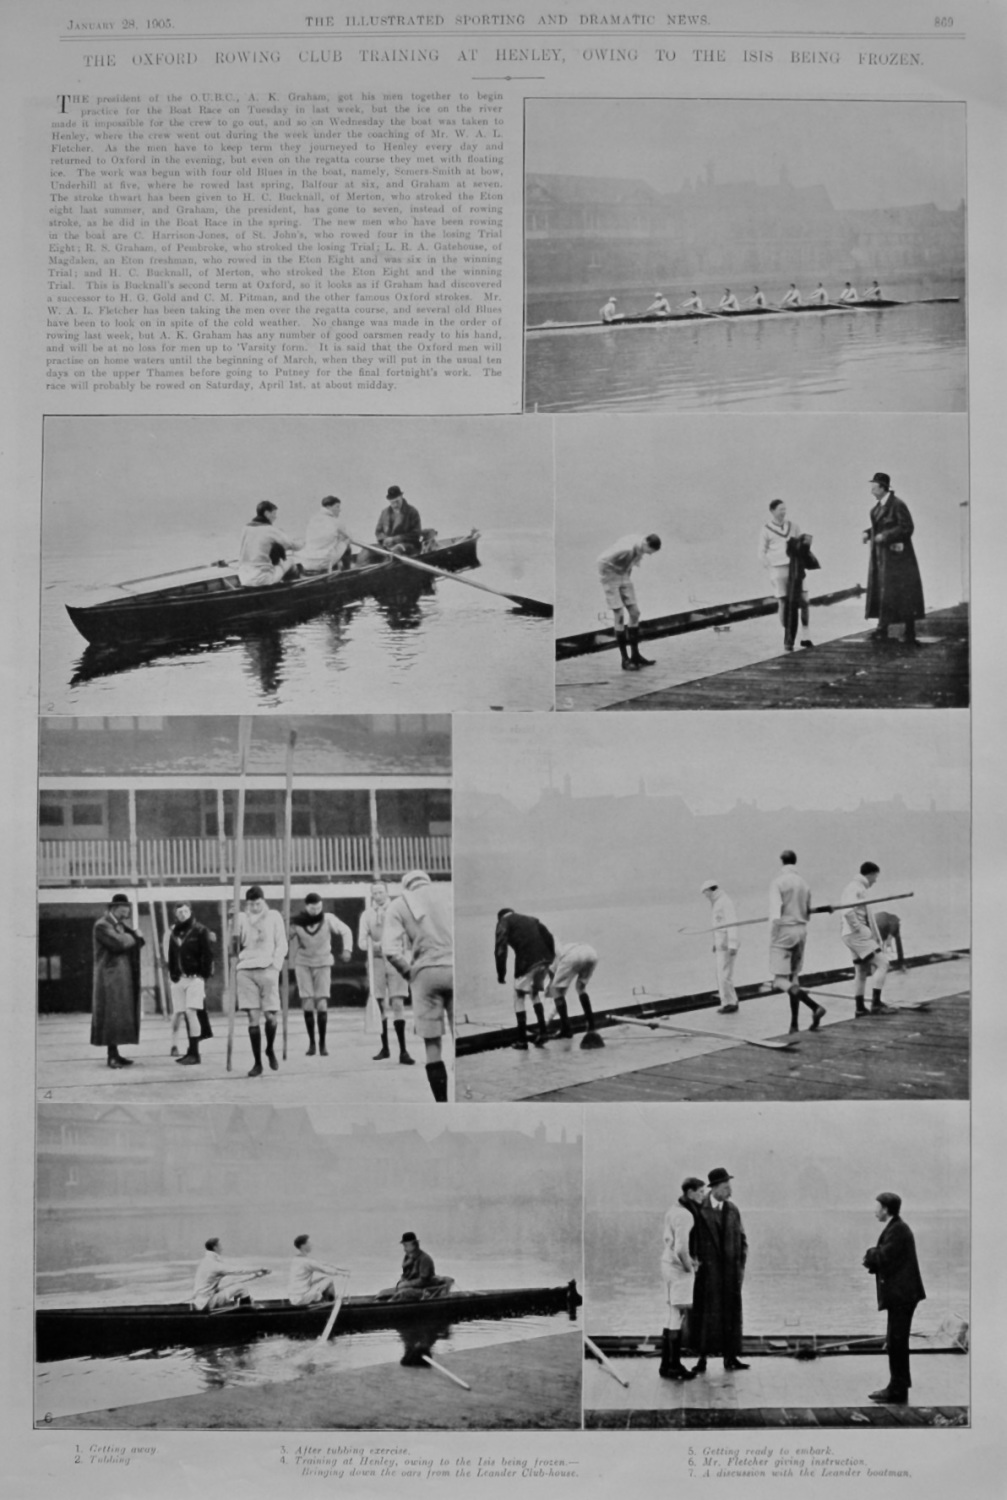 The Oxford Rowing Club Training at Henley, Owing to the Isis being Frozen. 